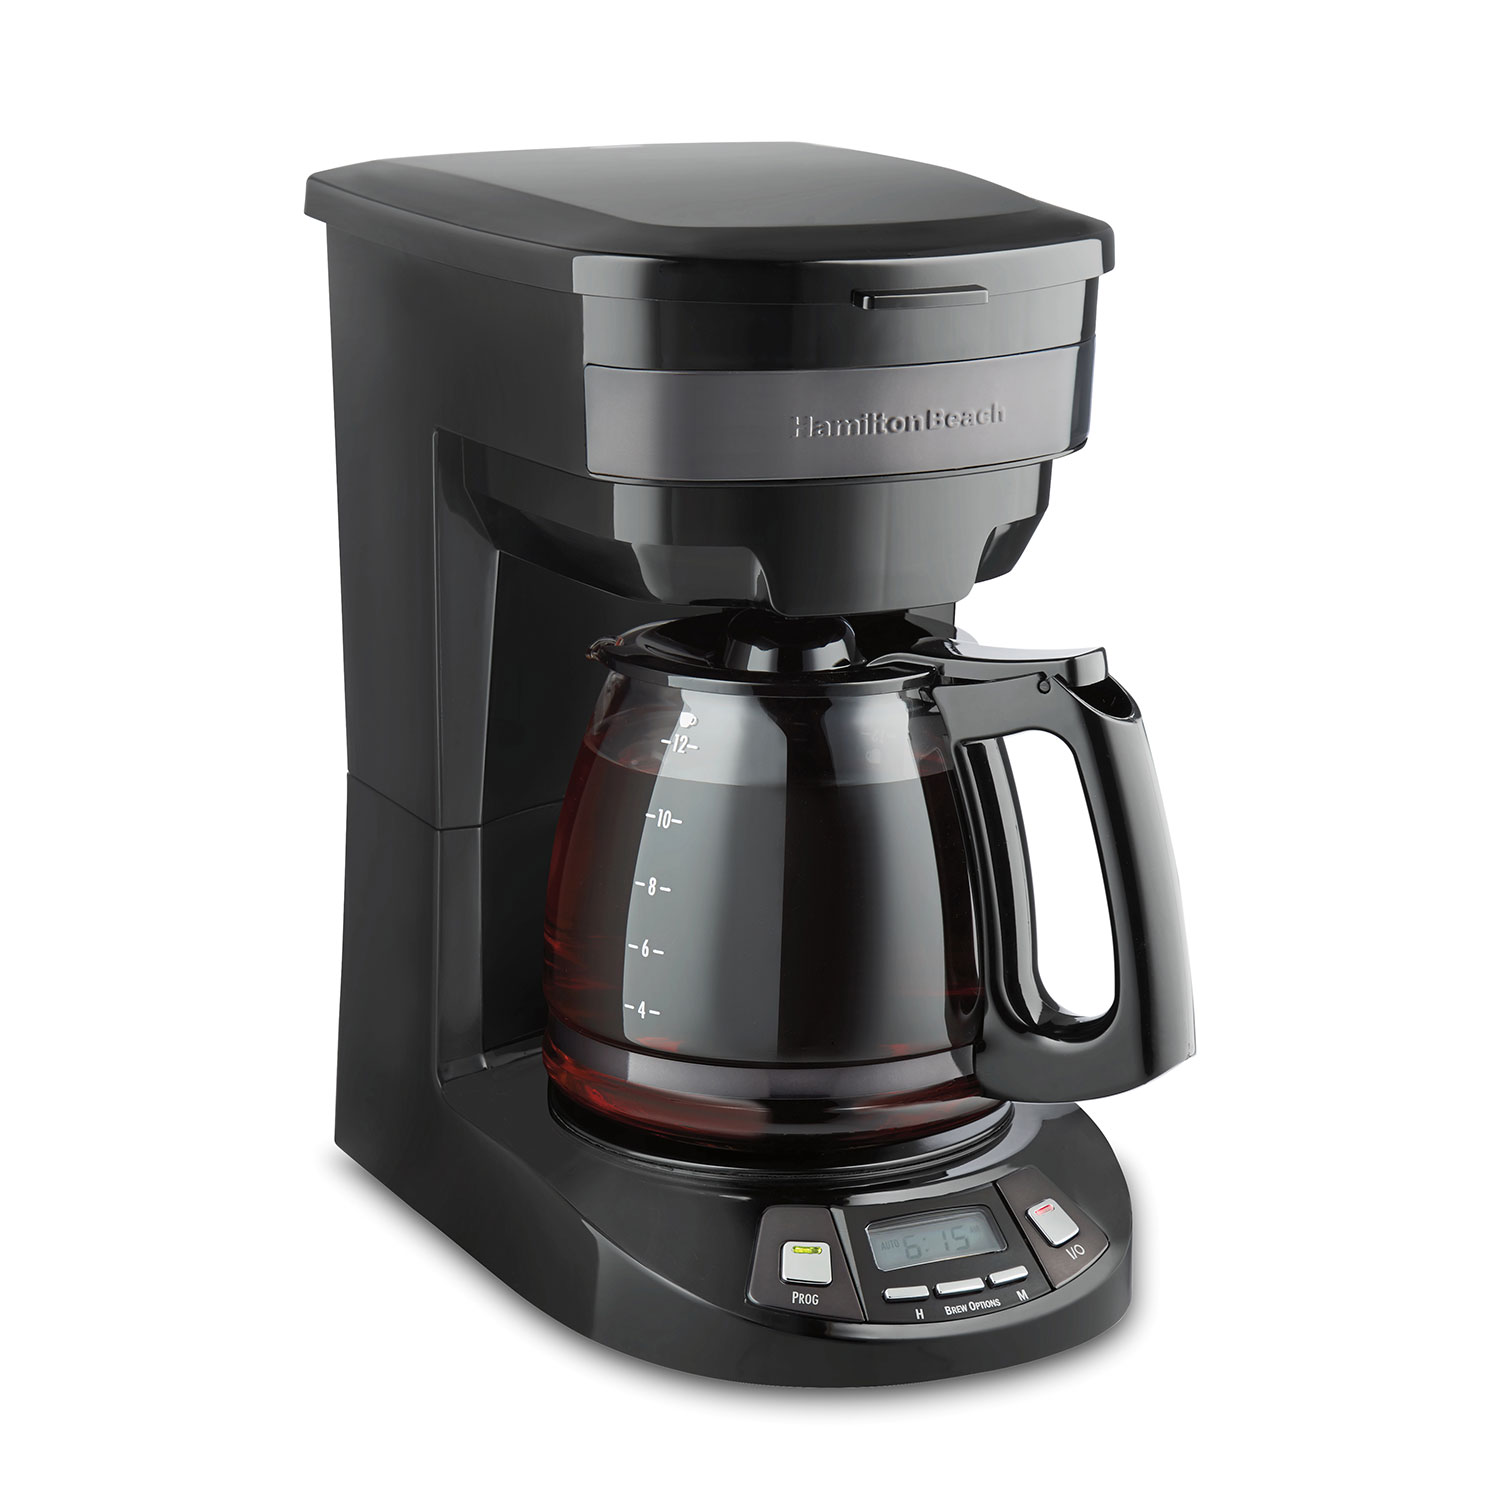 12 Cup Programmable Coffee Maker, Black and Stainless Steel (46293)